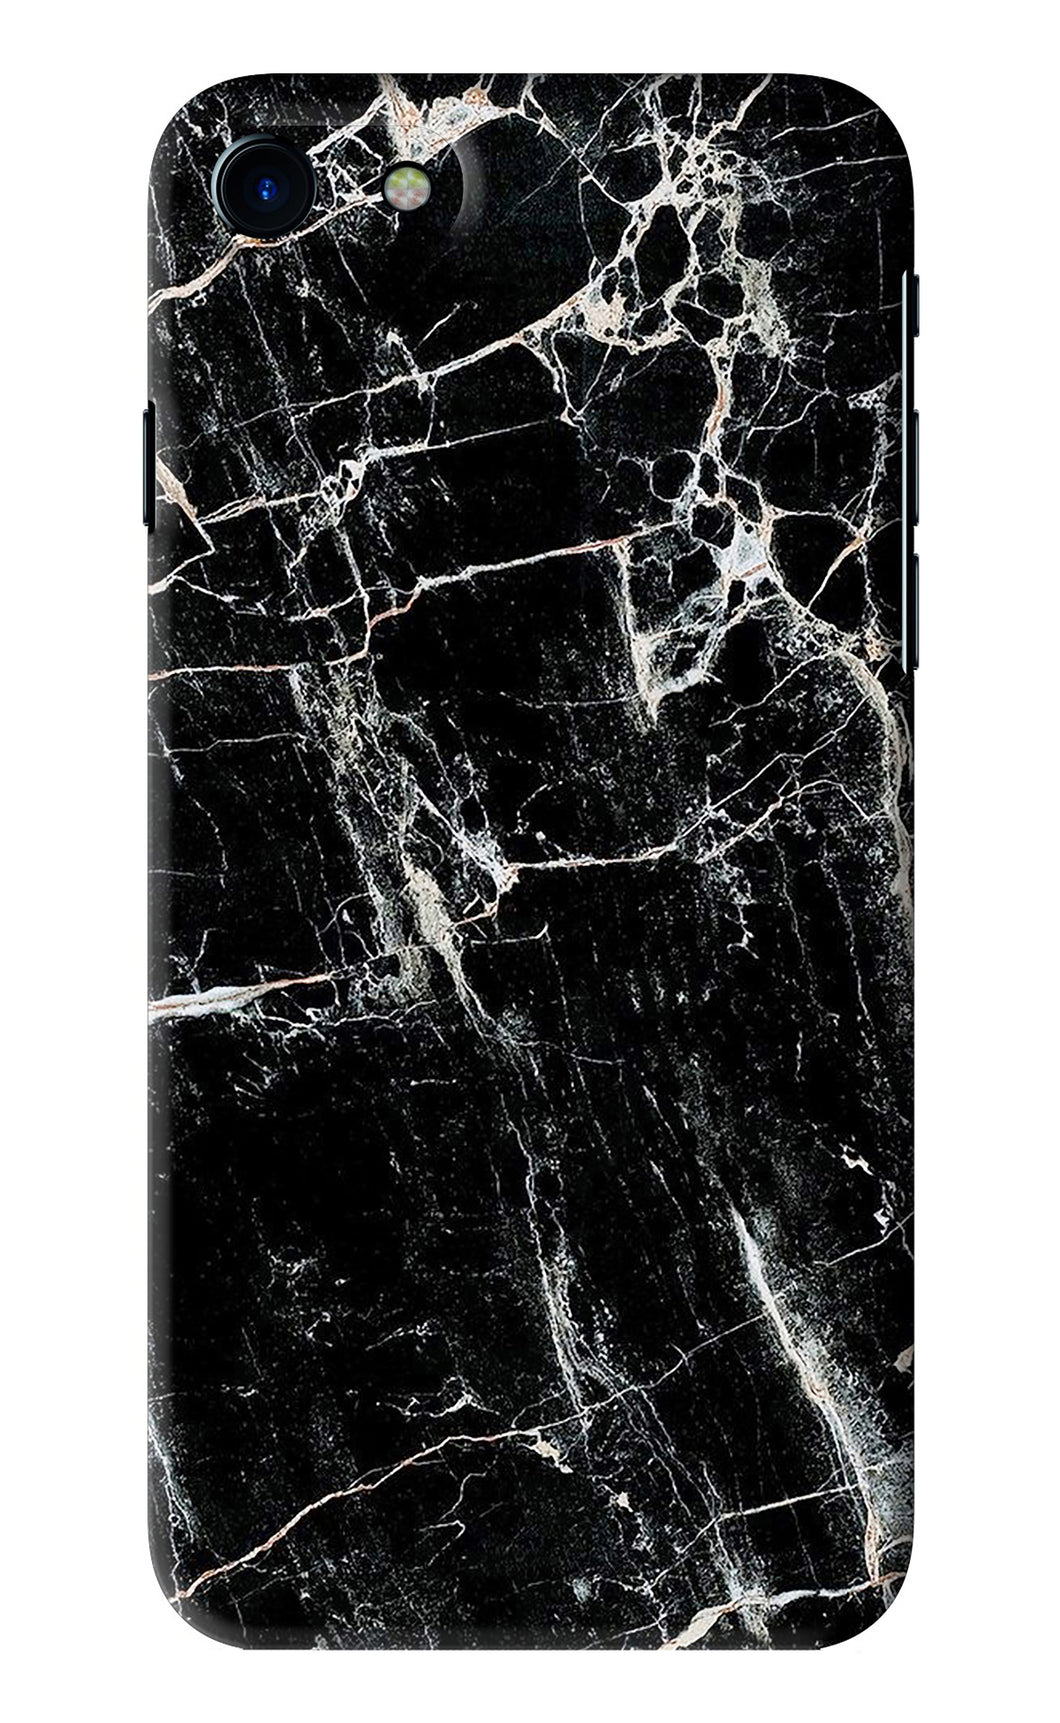 Black Marble Texture 1 iPhone 7 Back Skin Wrap